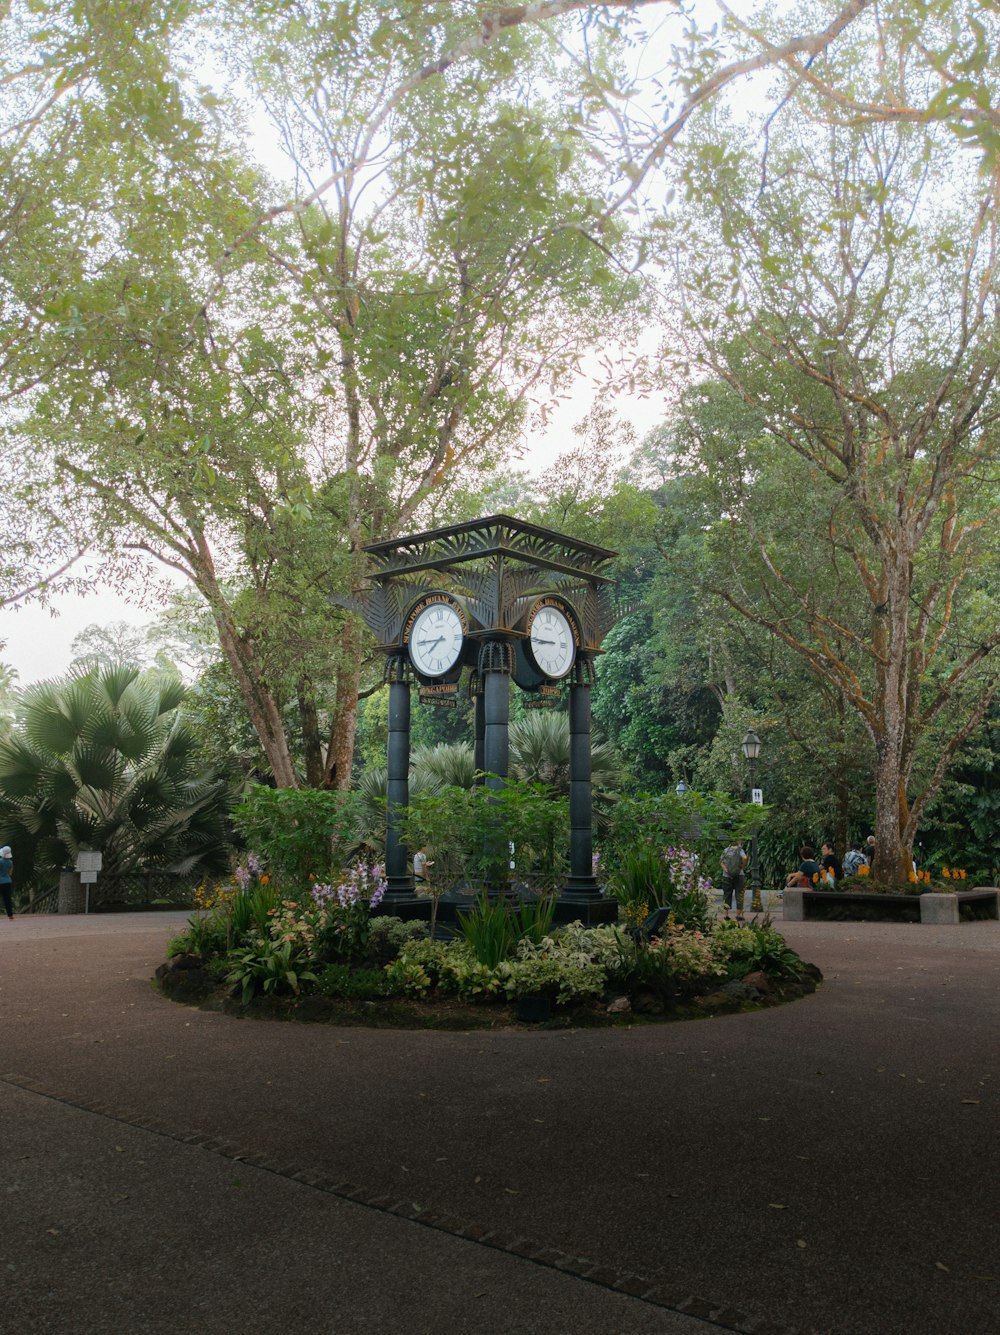 a clock tower in a park surrounded by trees